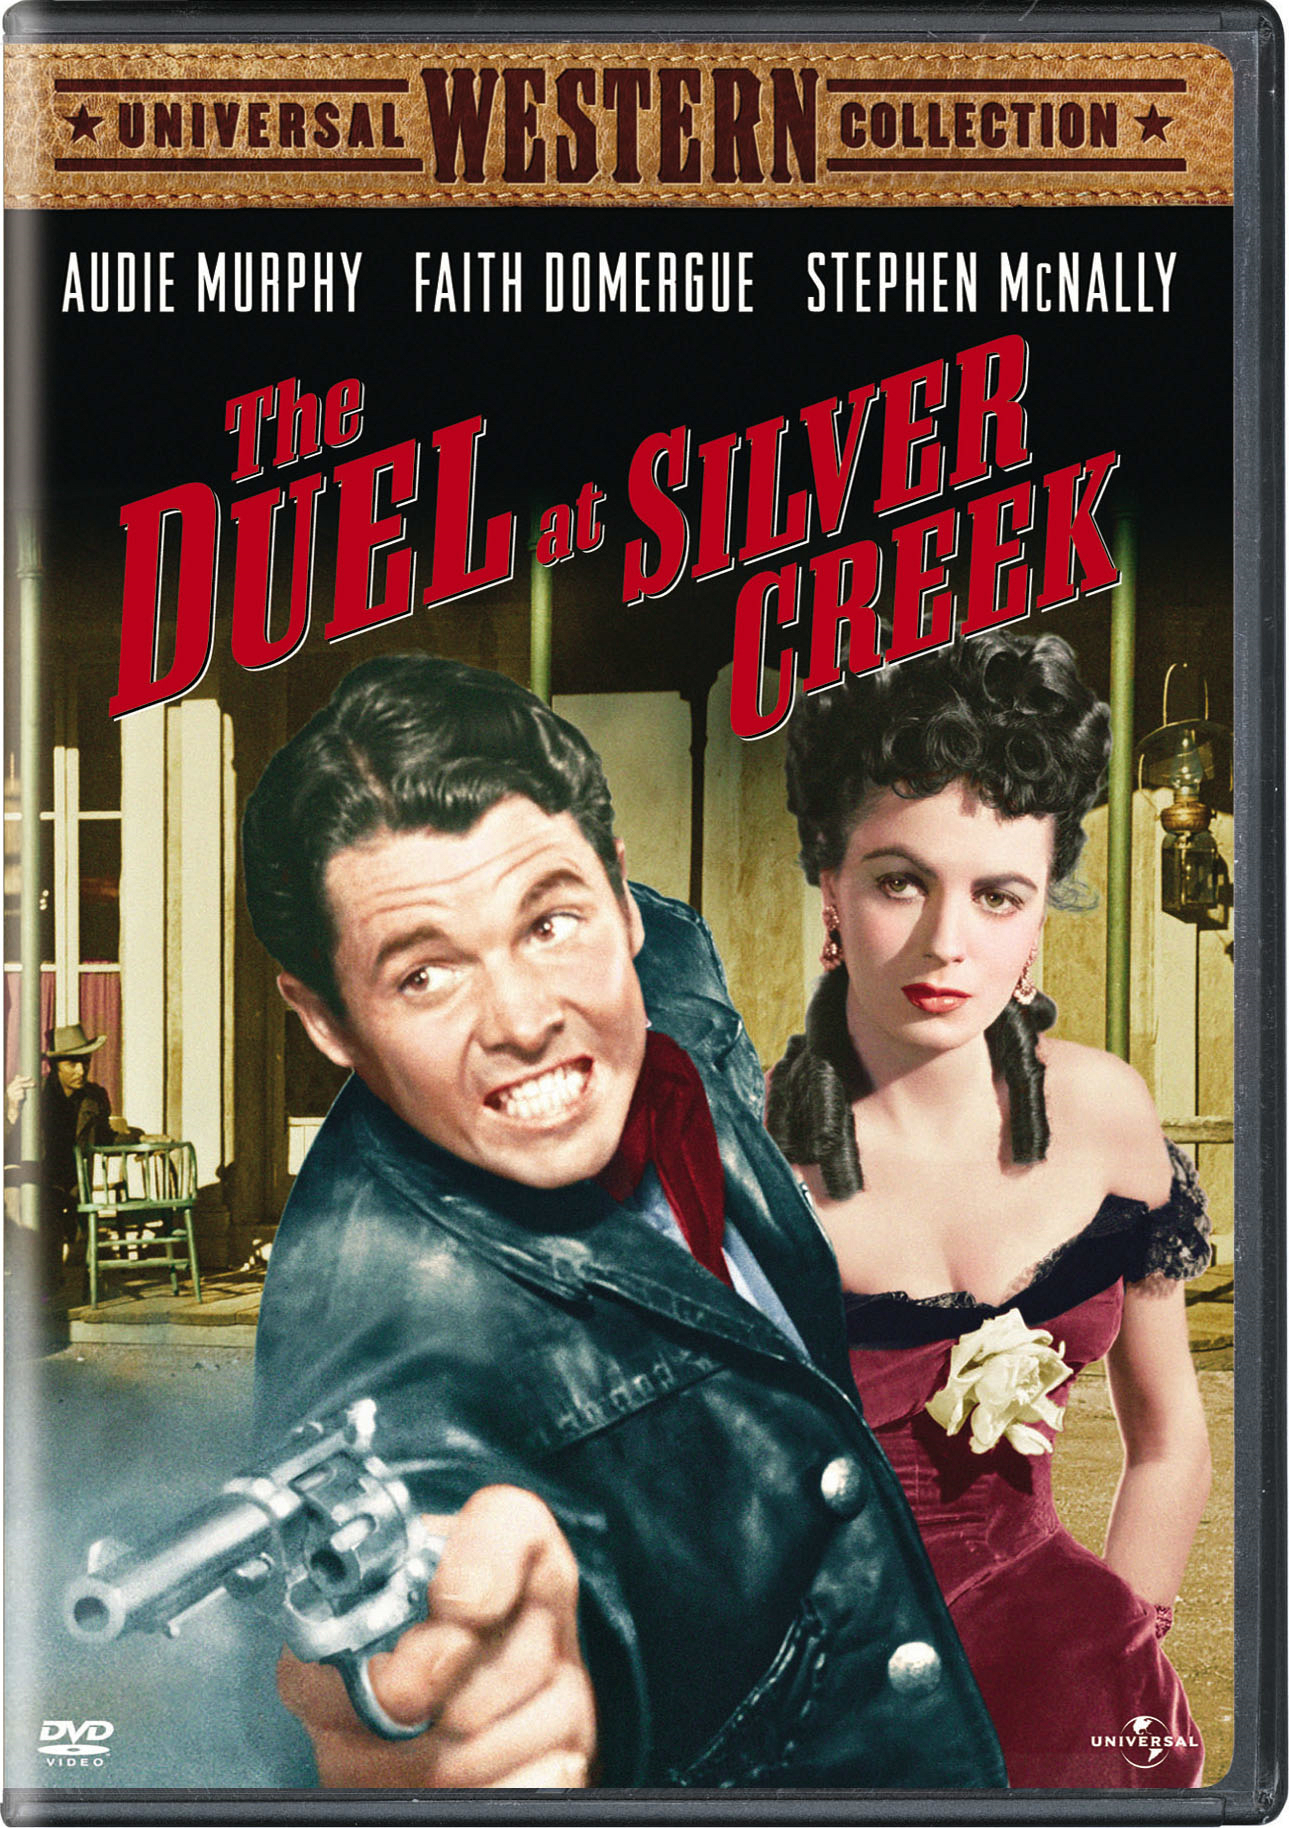 Duel At Silver Creek - DVD [ 1952 ]  - Western Movies On DVD - Movies On GRUV